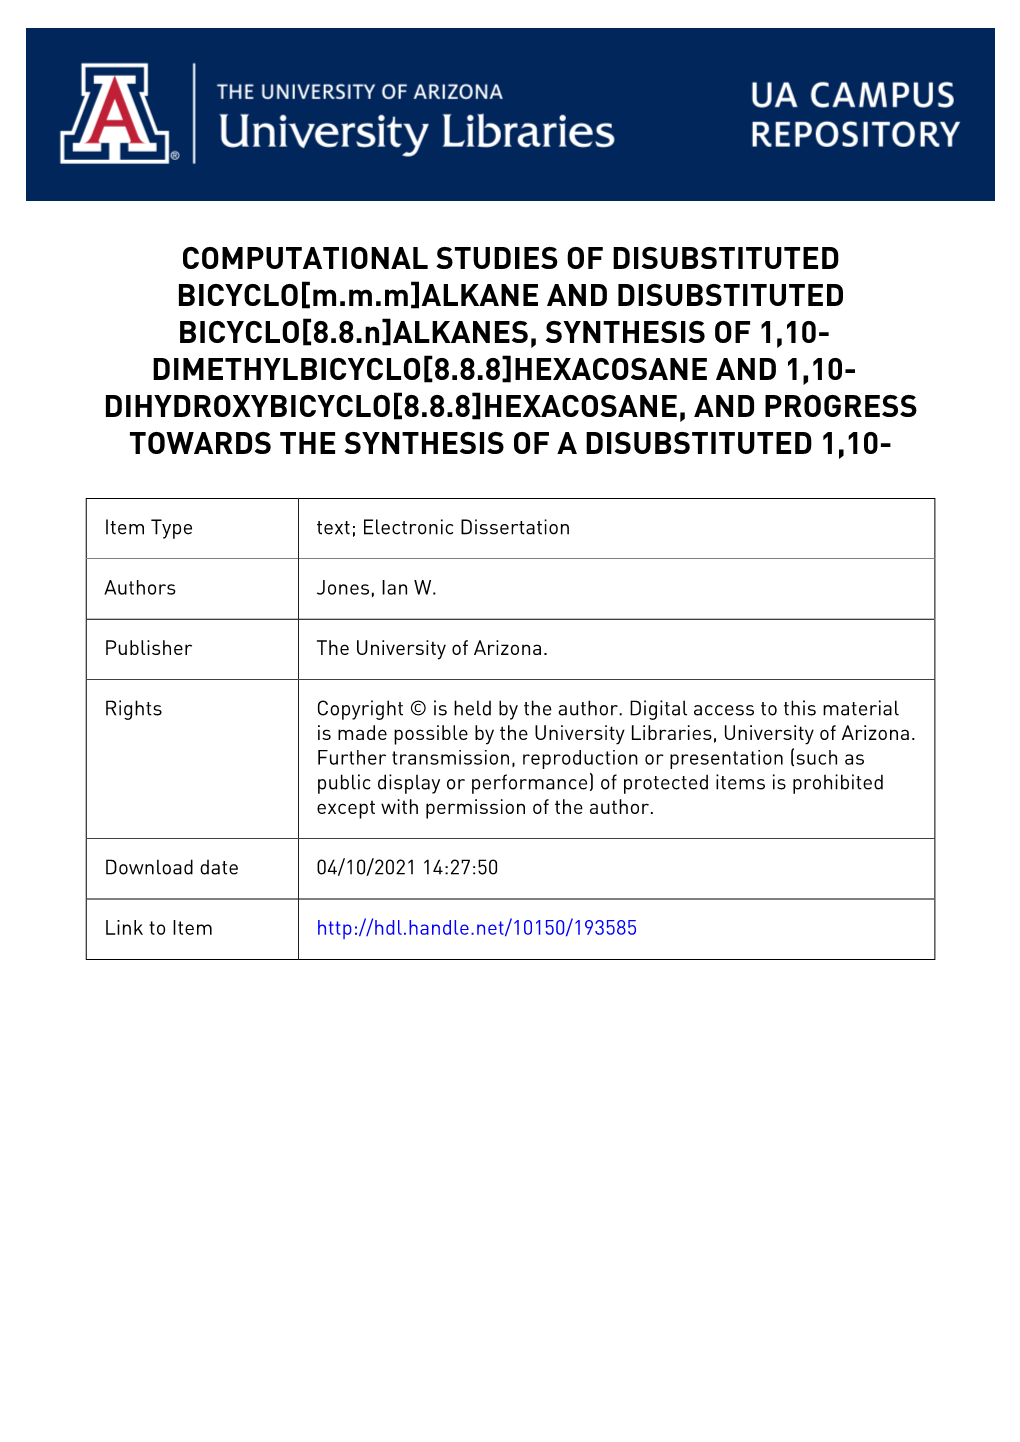 COMPUTATIONAL STUDIES of DISUBSTITUTED BICYCLO[M.M.M